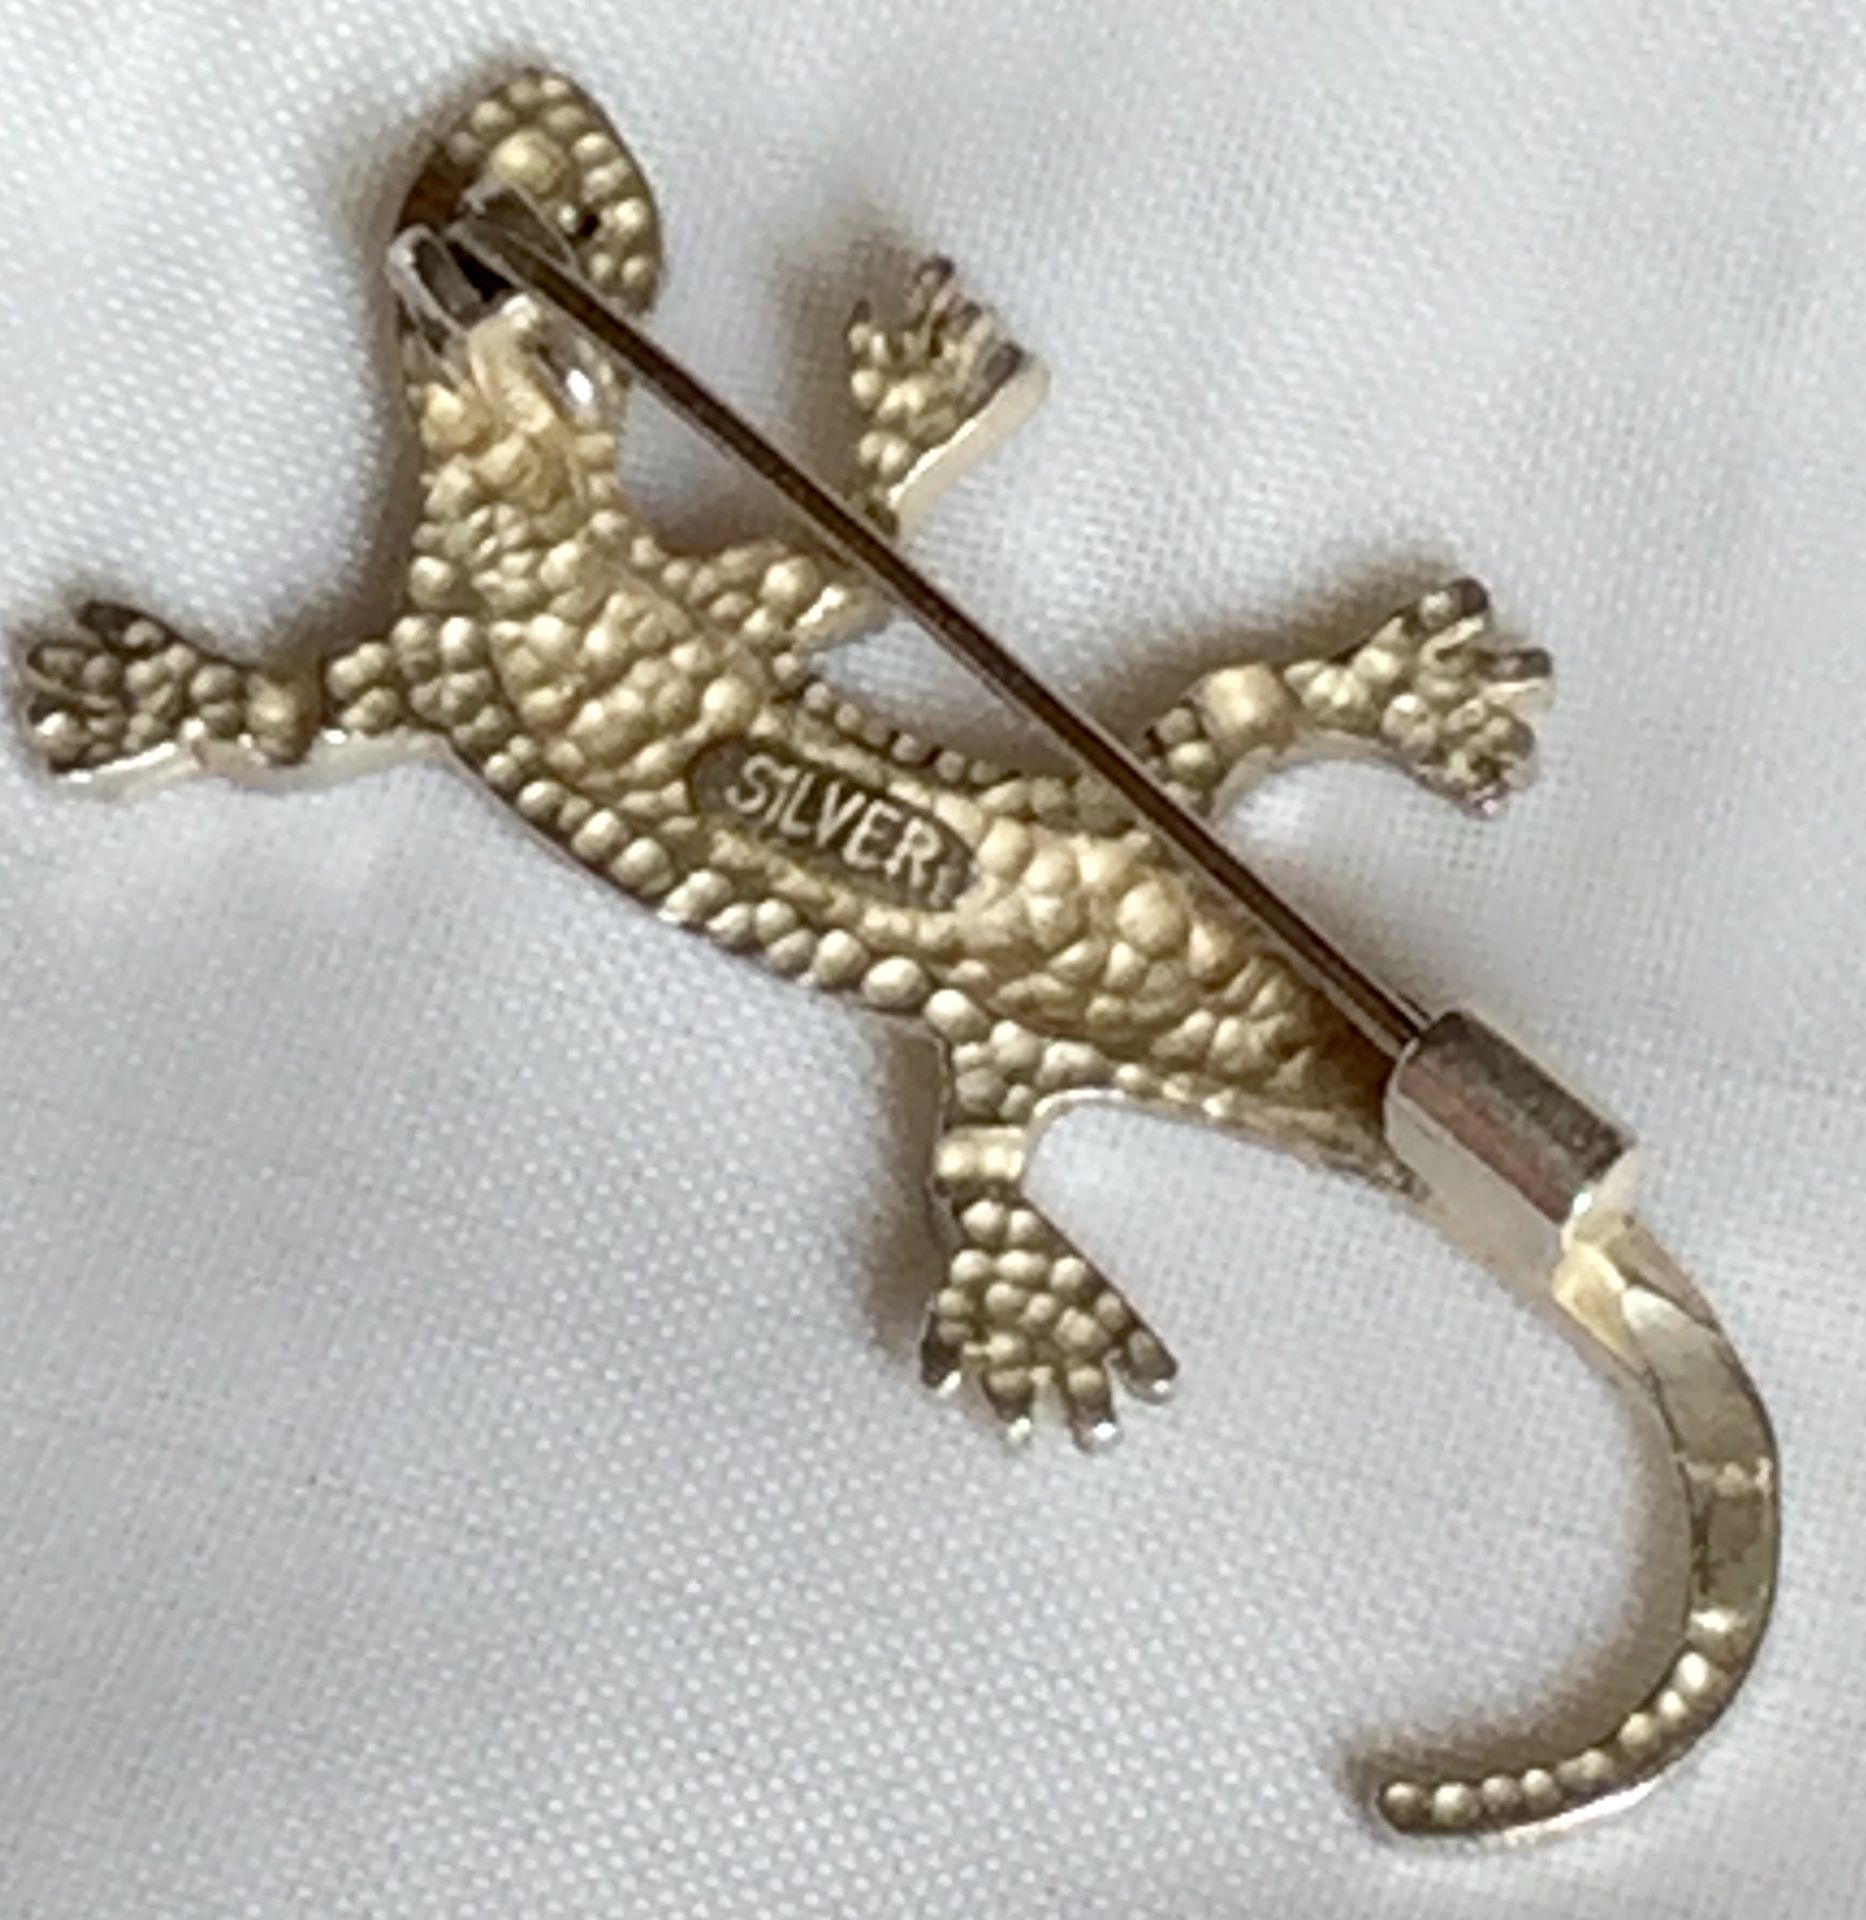 Silver Vintage Lizard Brooch with sparkly onyx eyes 4.10 grams - Image 7 of 7